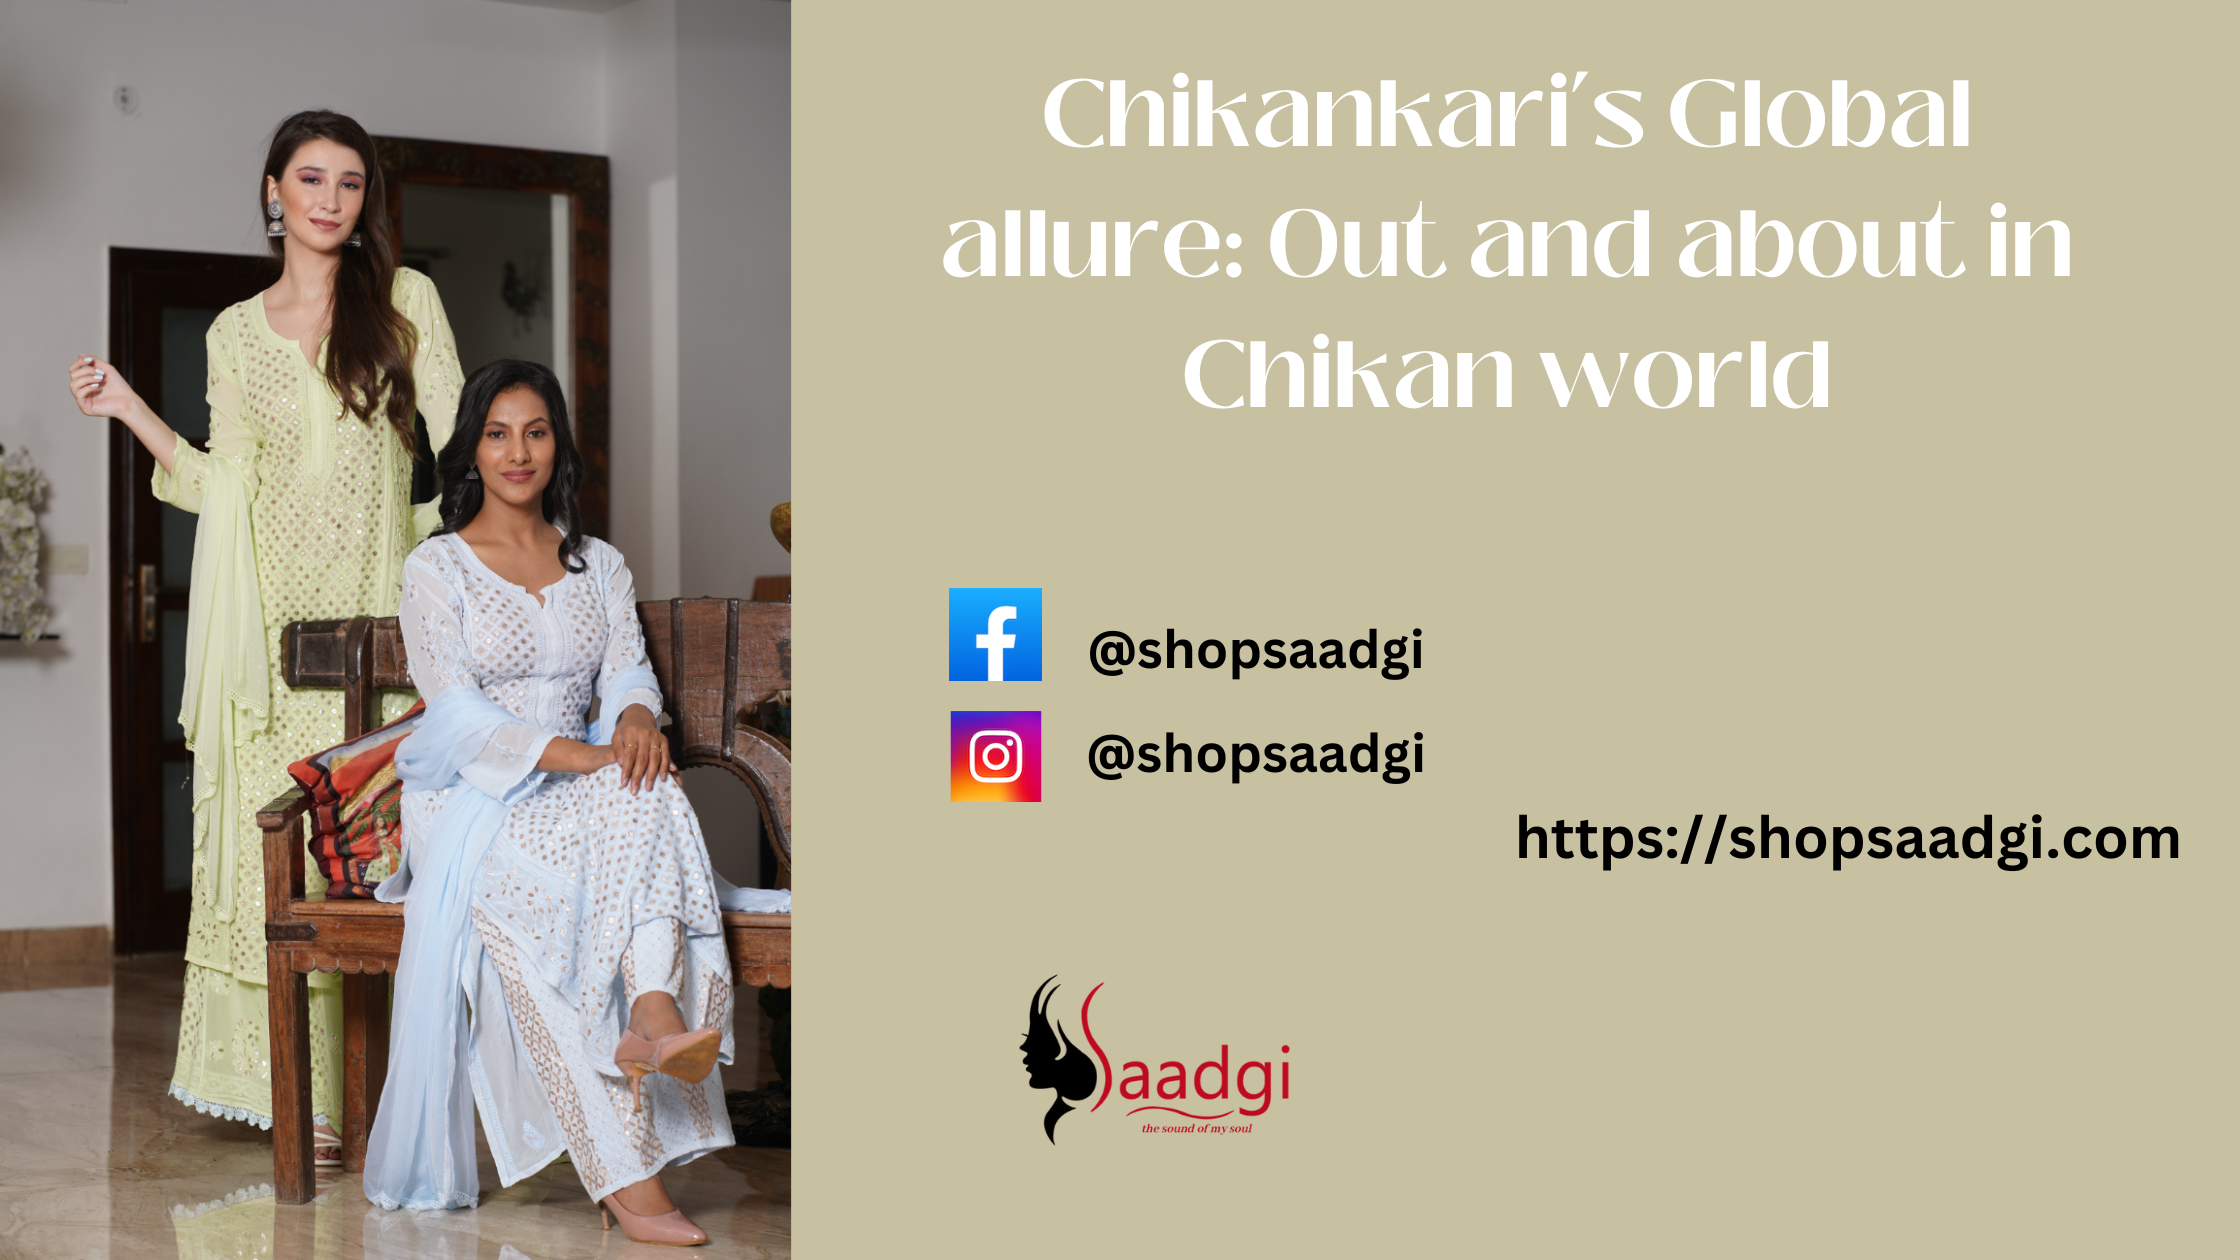 Chikankari’s Global allure: Out and about in Chikan world